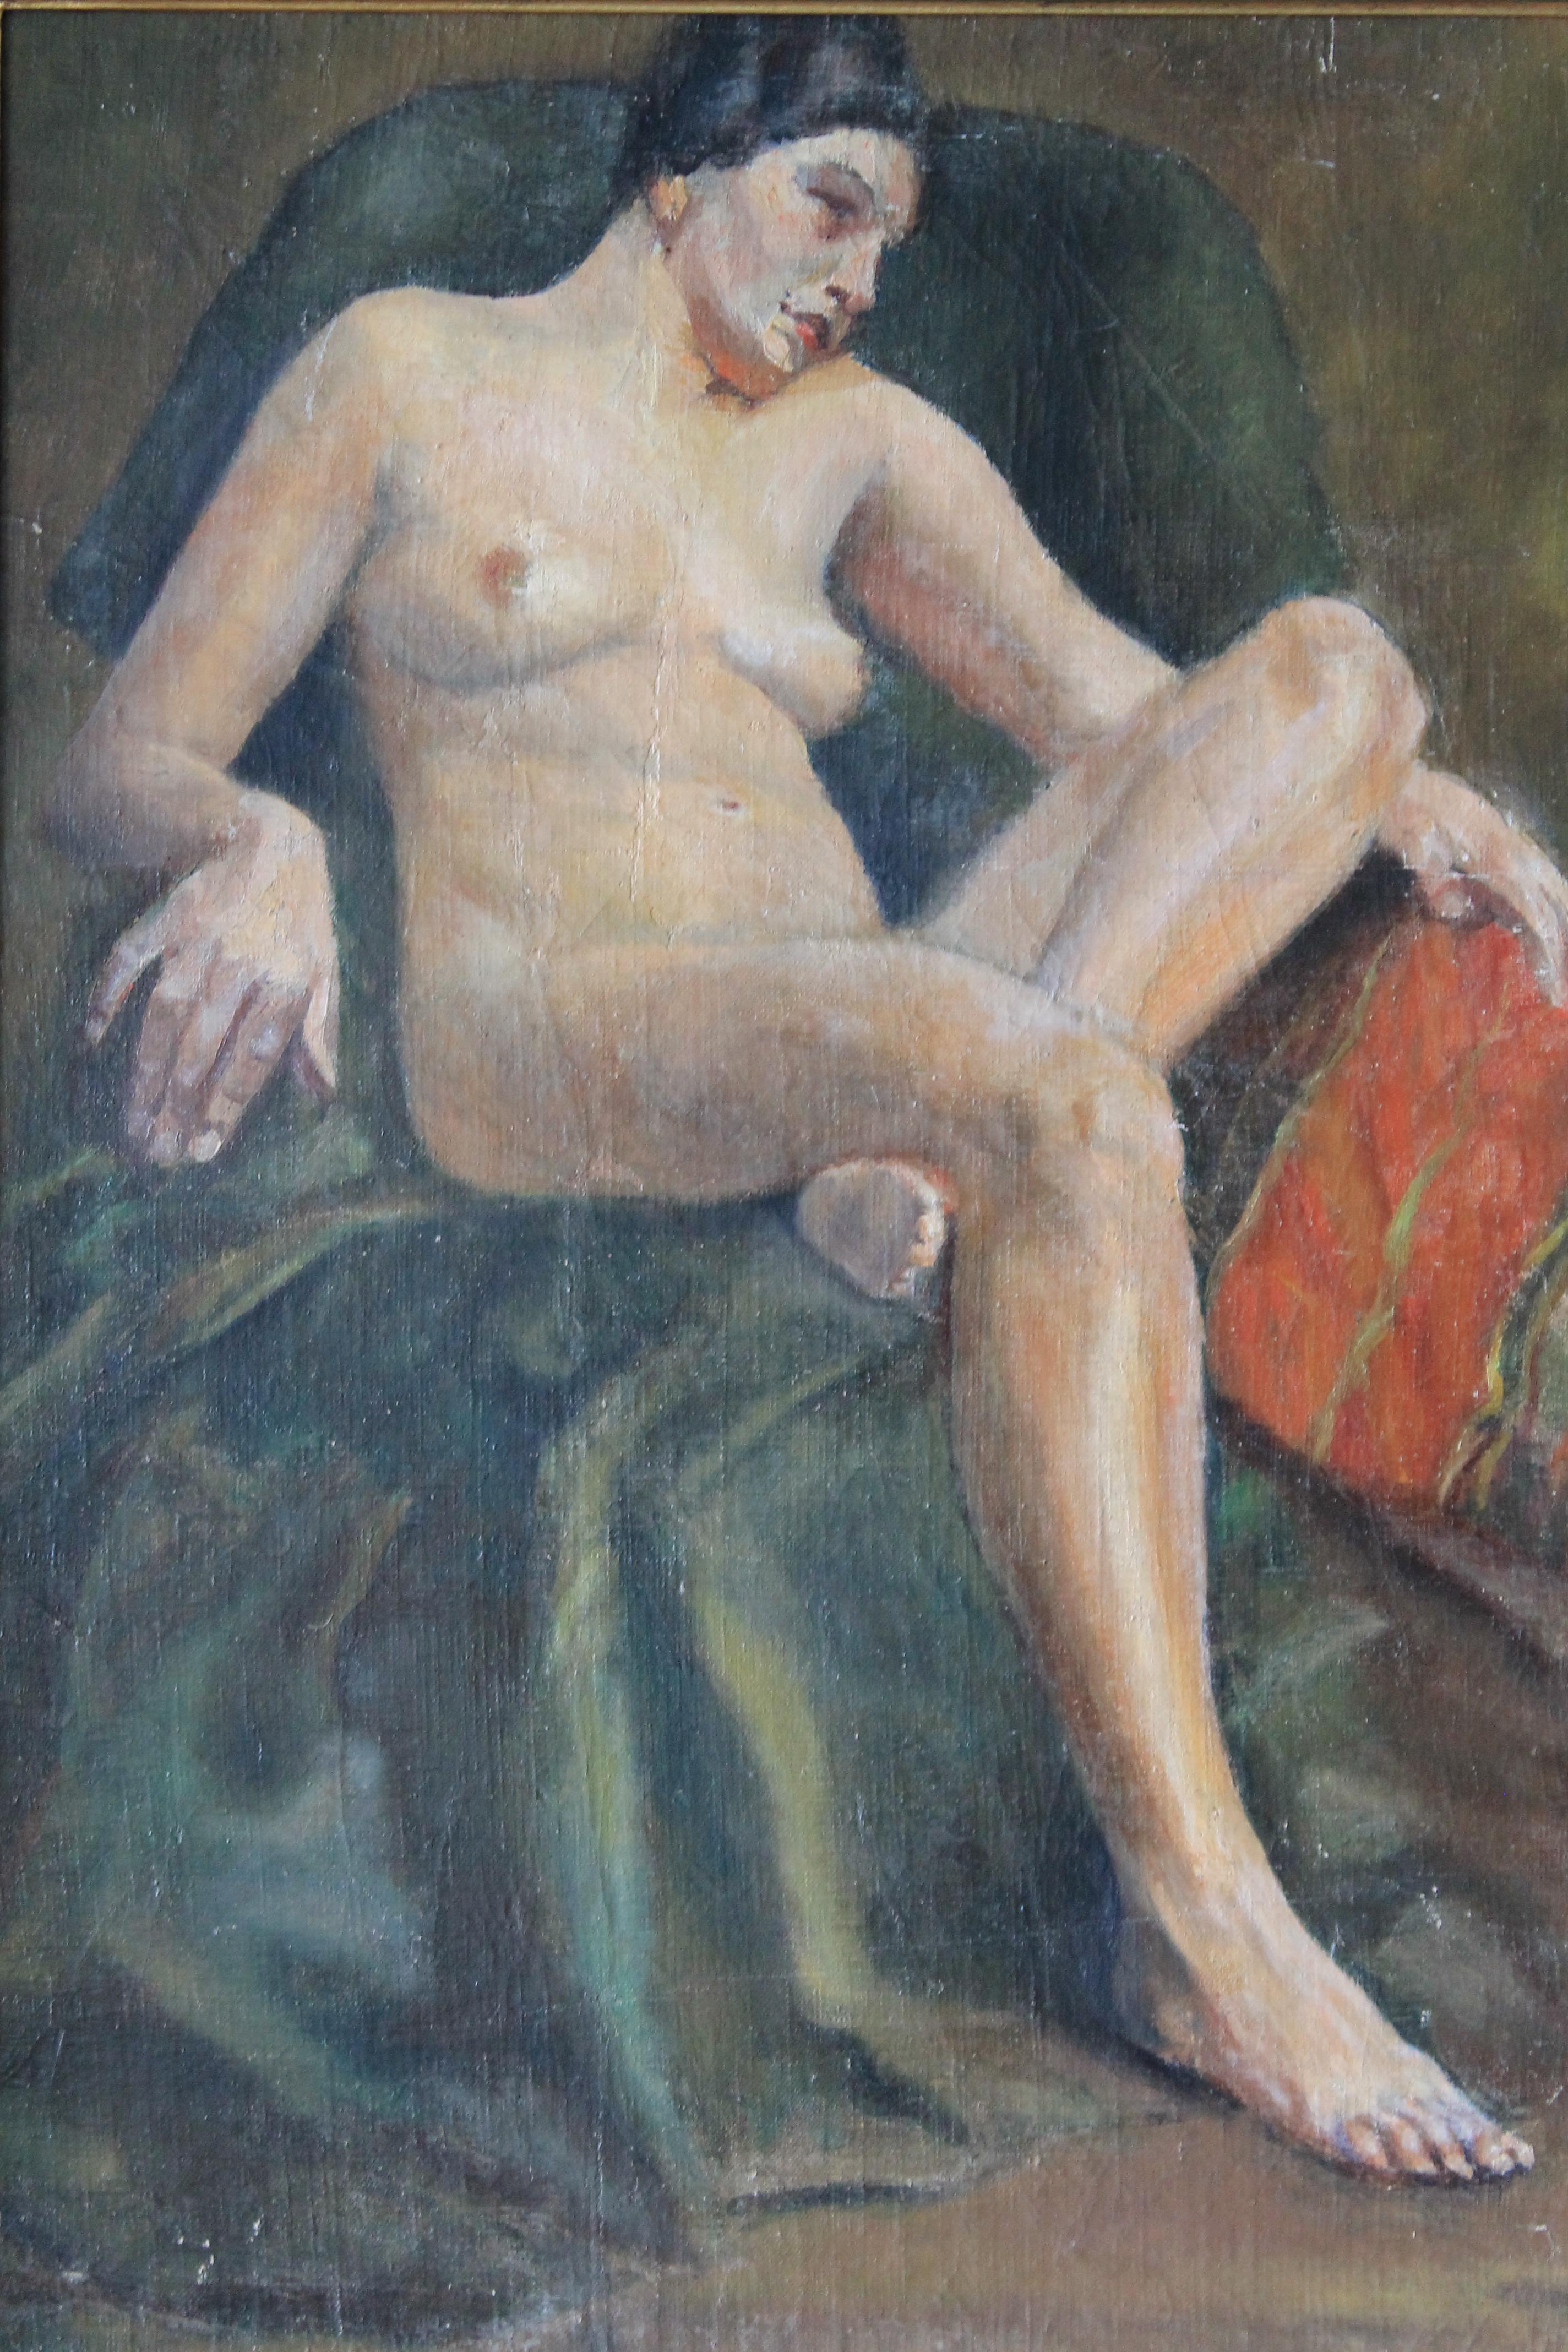 Antique nude portrait painting of a woman sitting, canvas on wood.  A woman sits in a large chair with a green throw, her legs crossed, perhaps she is sleeping.  It's very atmospheric with beautiful skin tone hues.

MORE ABOUT THIS